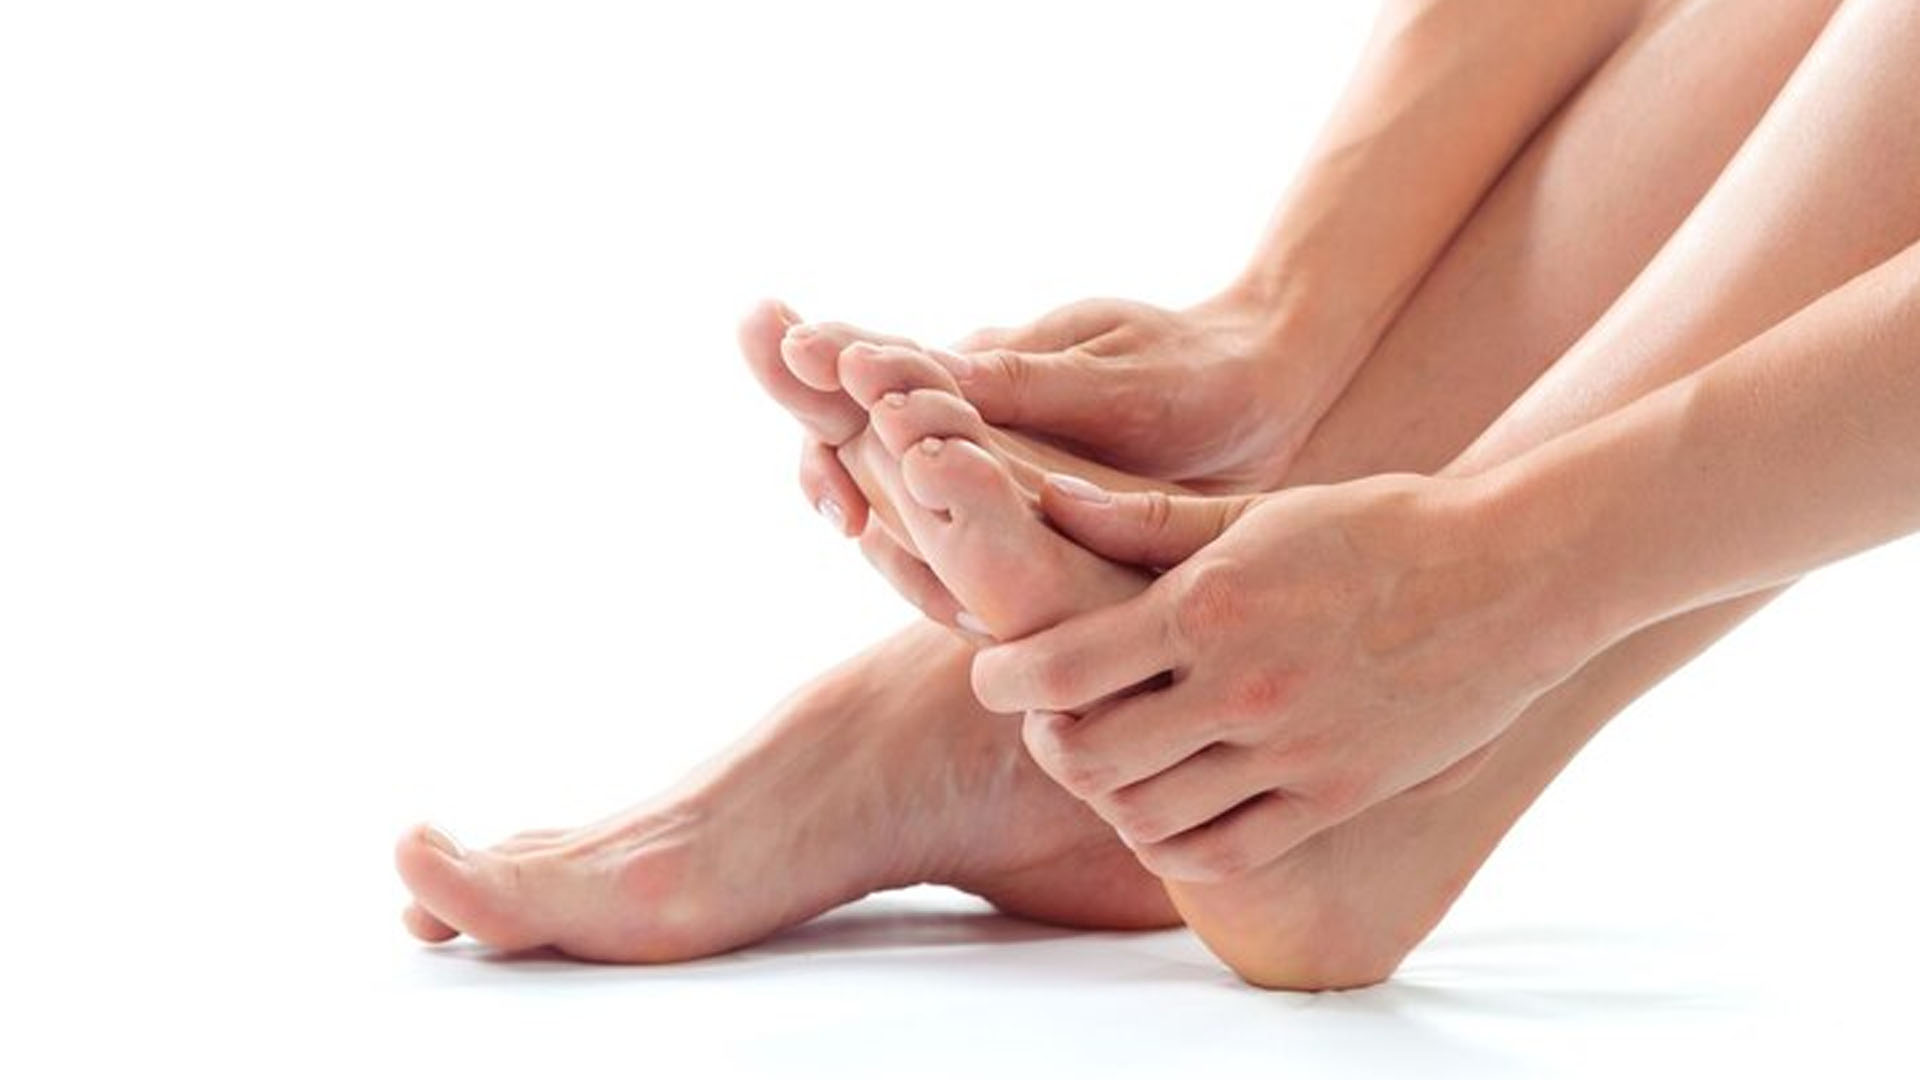 What are the Home Remedies for Foot Cracks?